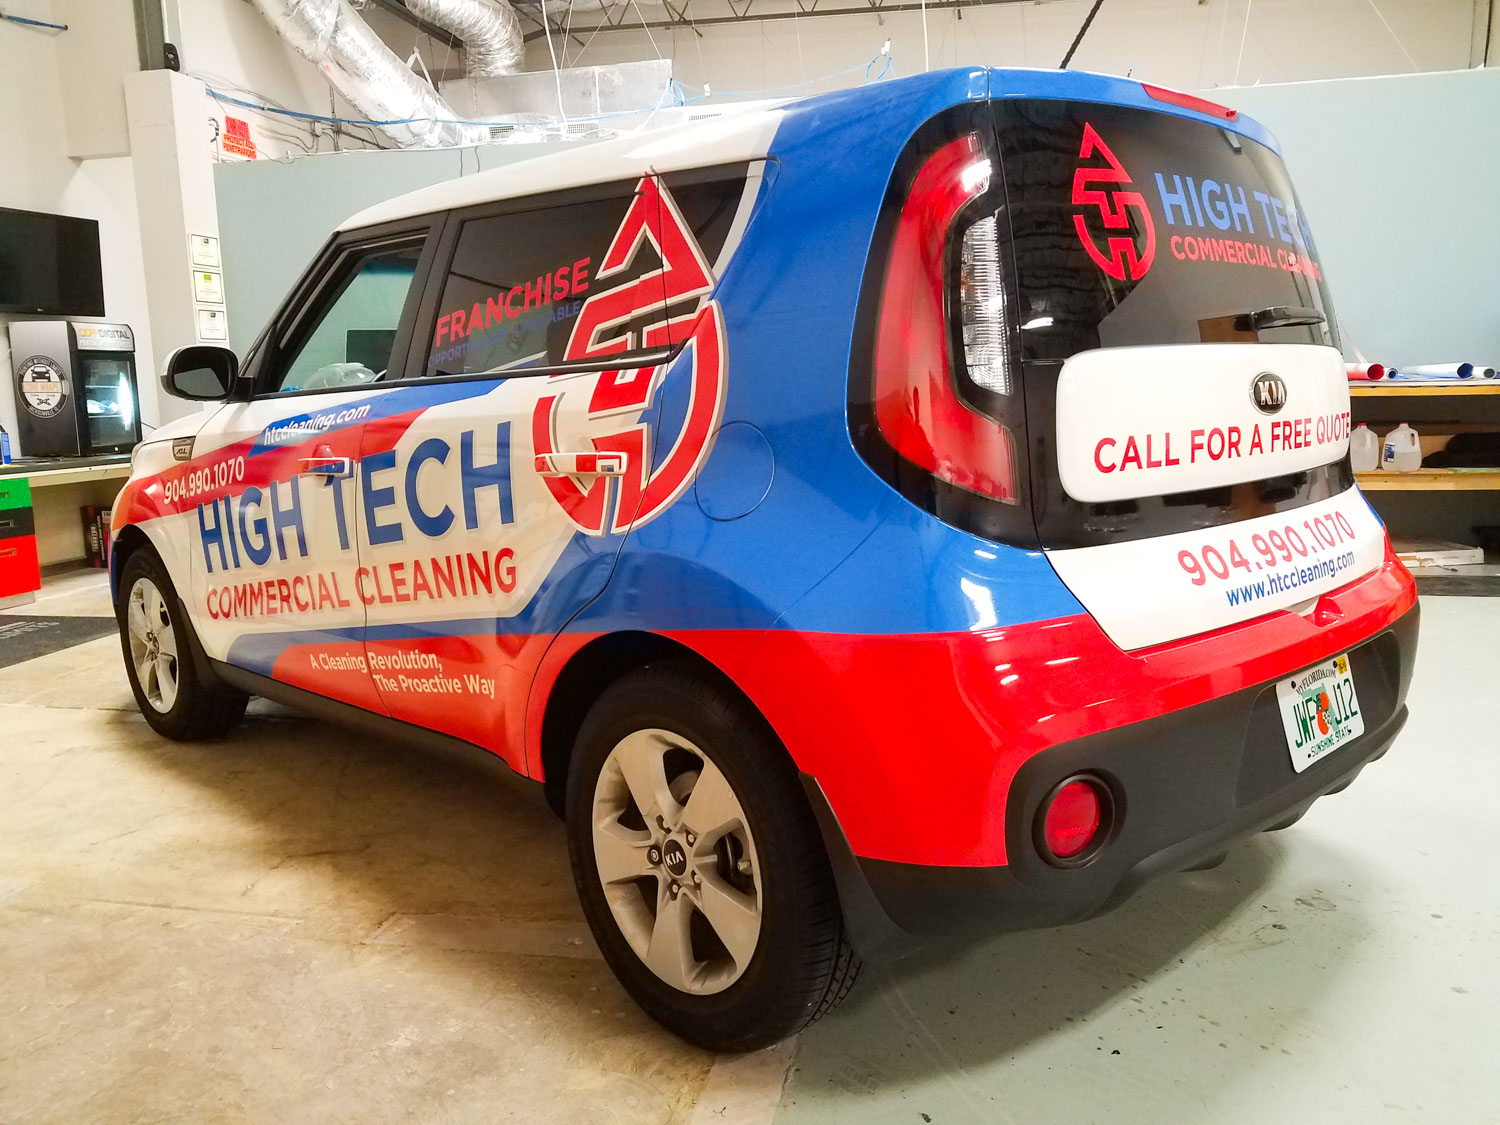 High Tech Commercial Cleaning Vehicle Wrap